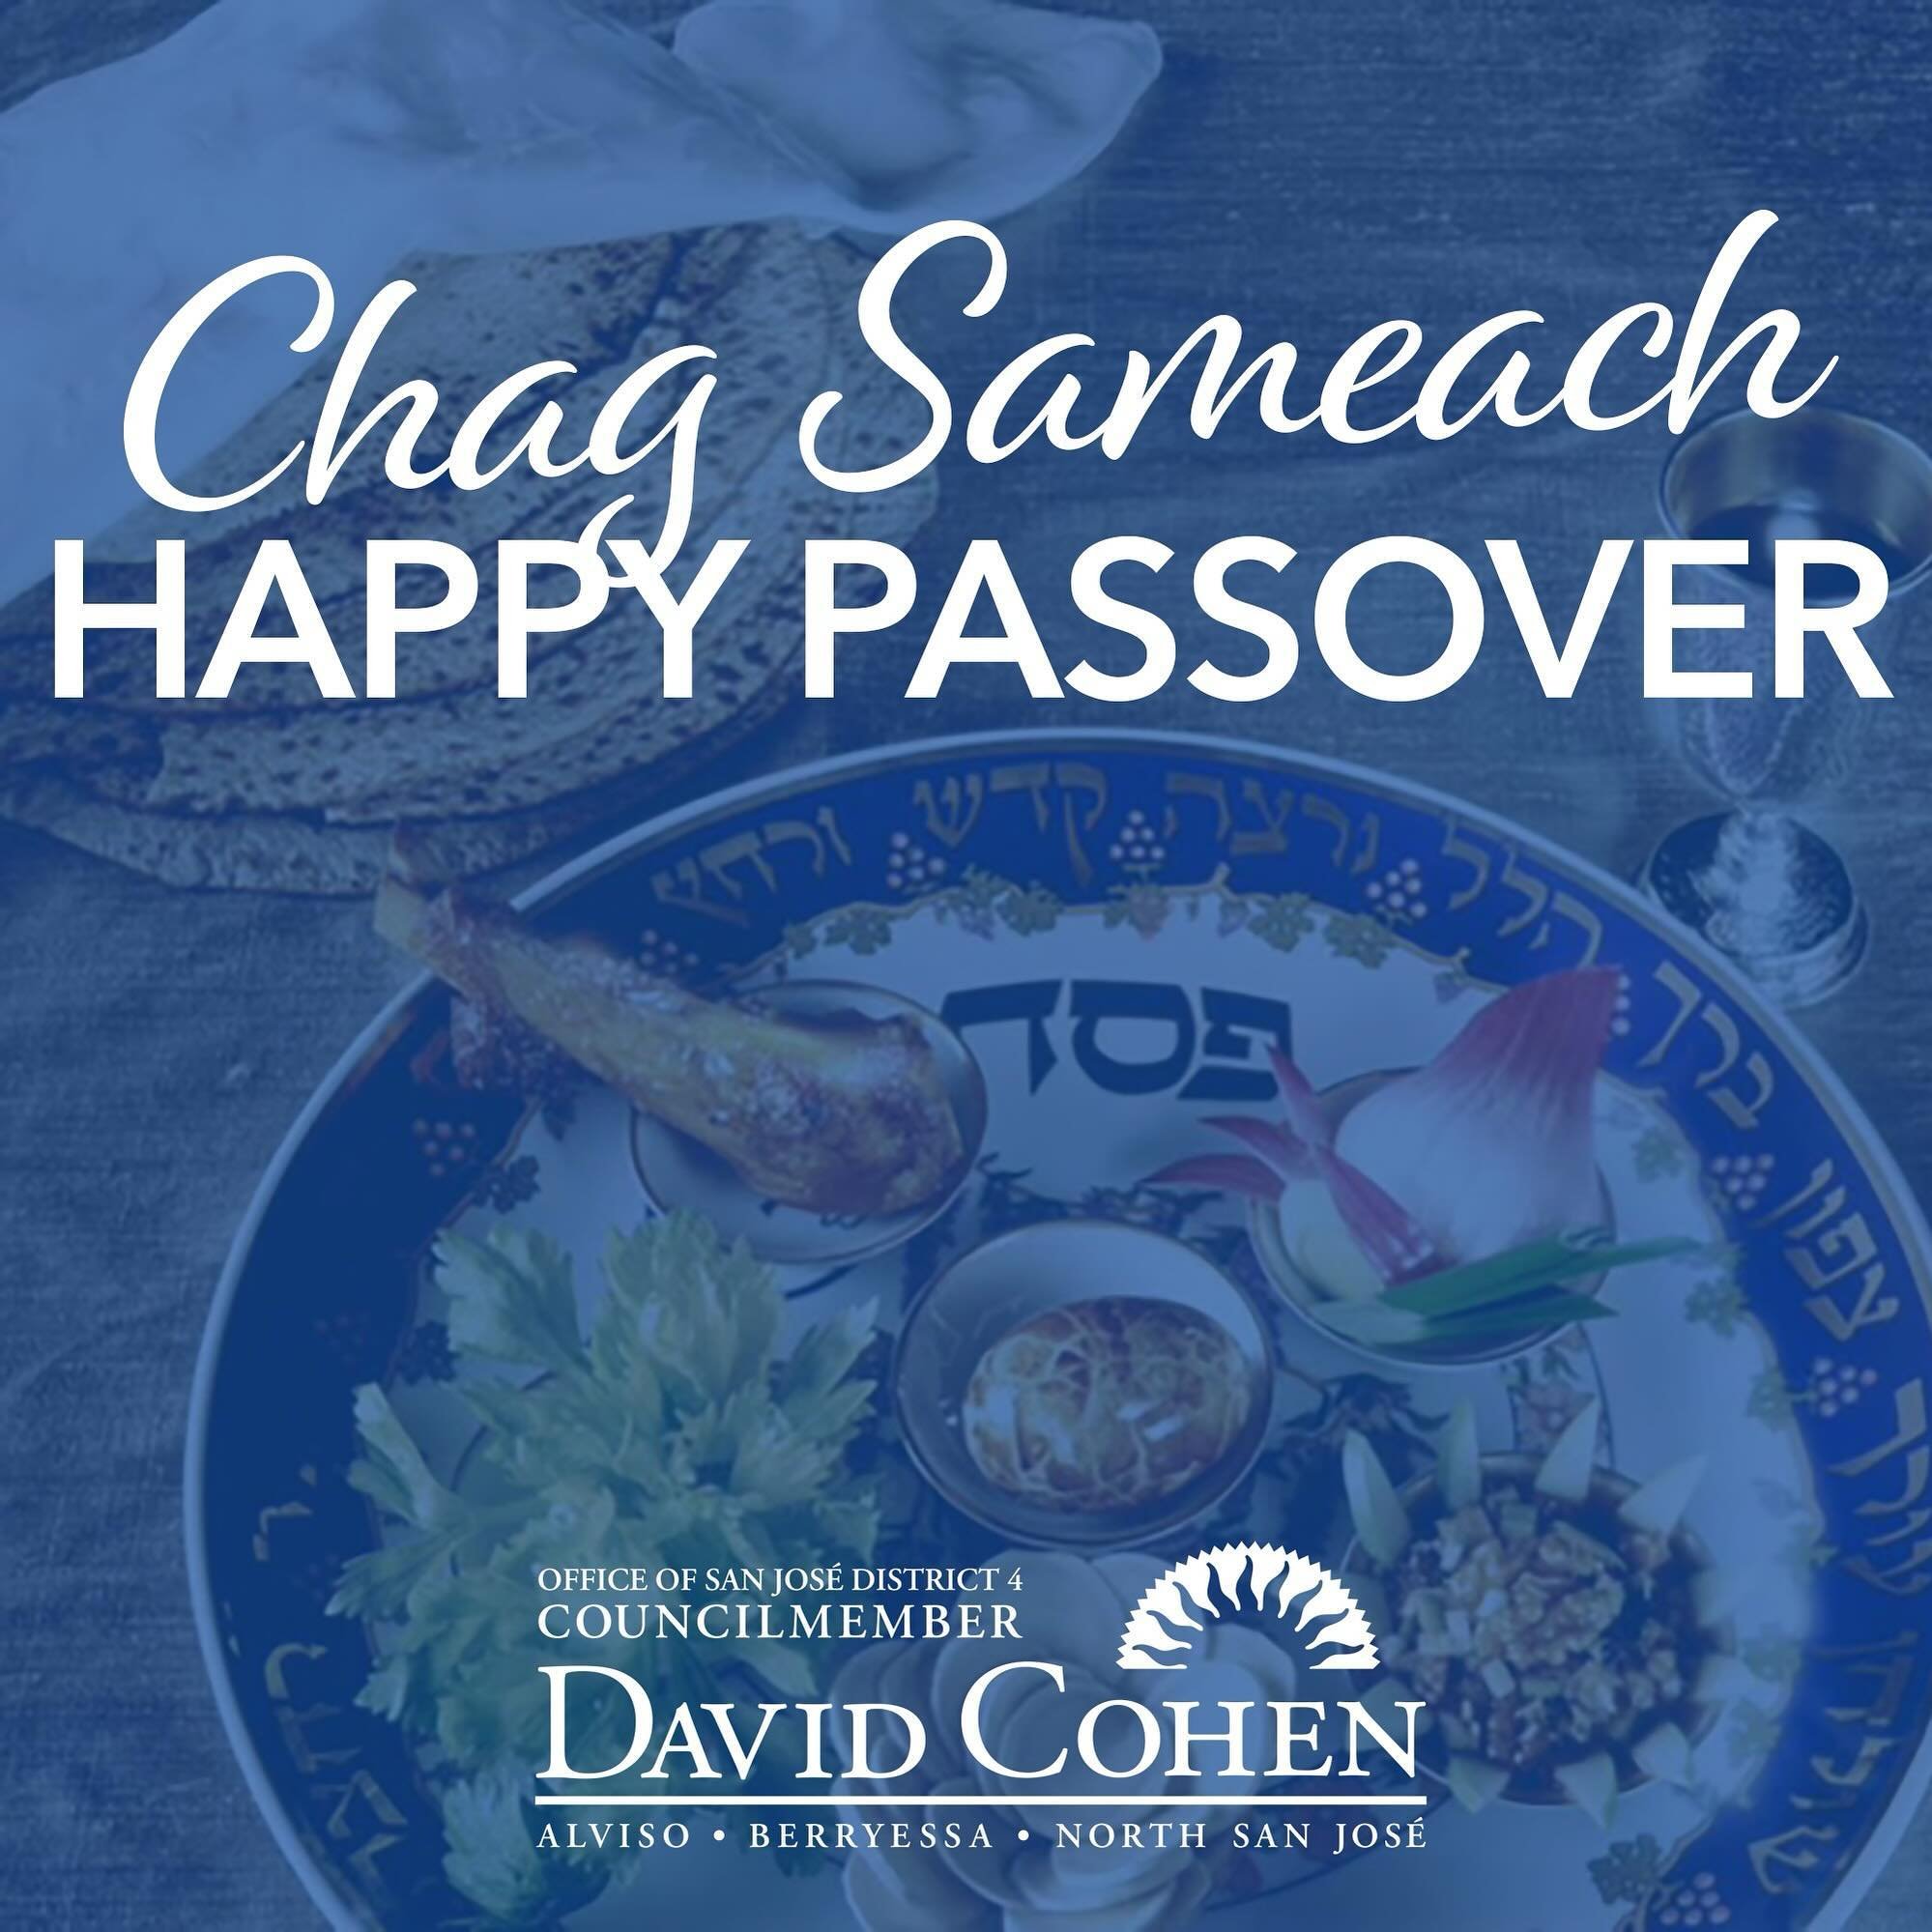 Chag Pesach Sameach to all celebrating Passover in our wonderful community! As we gather around the Seder table, may the story of liberation inspire us to cherish freedom, cherish family, and cherish the blessings of togetherness. Wishing you joy, pe